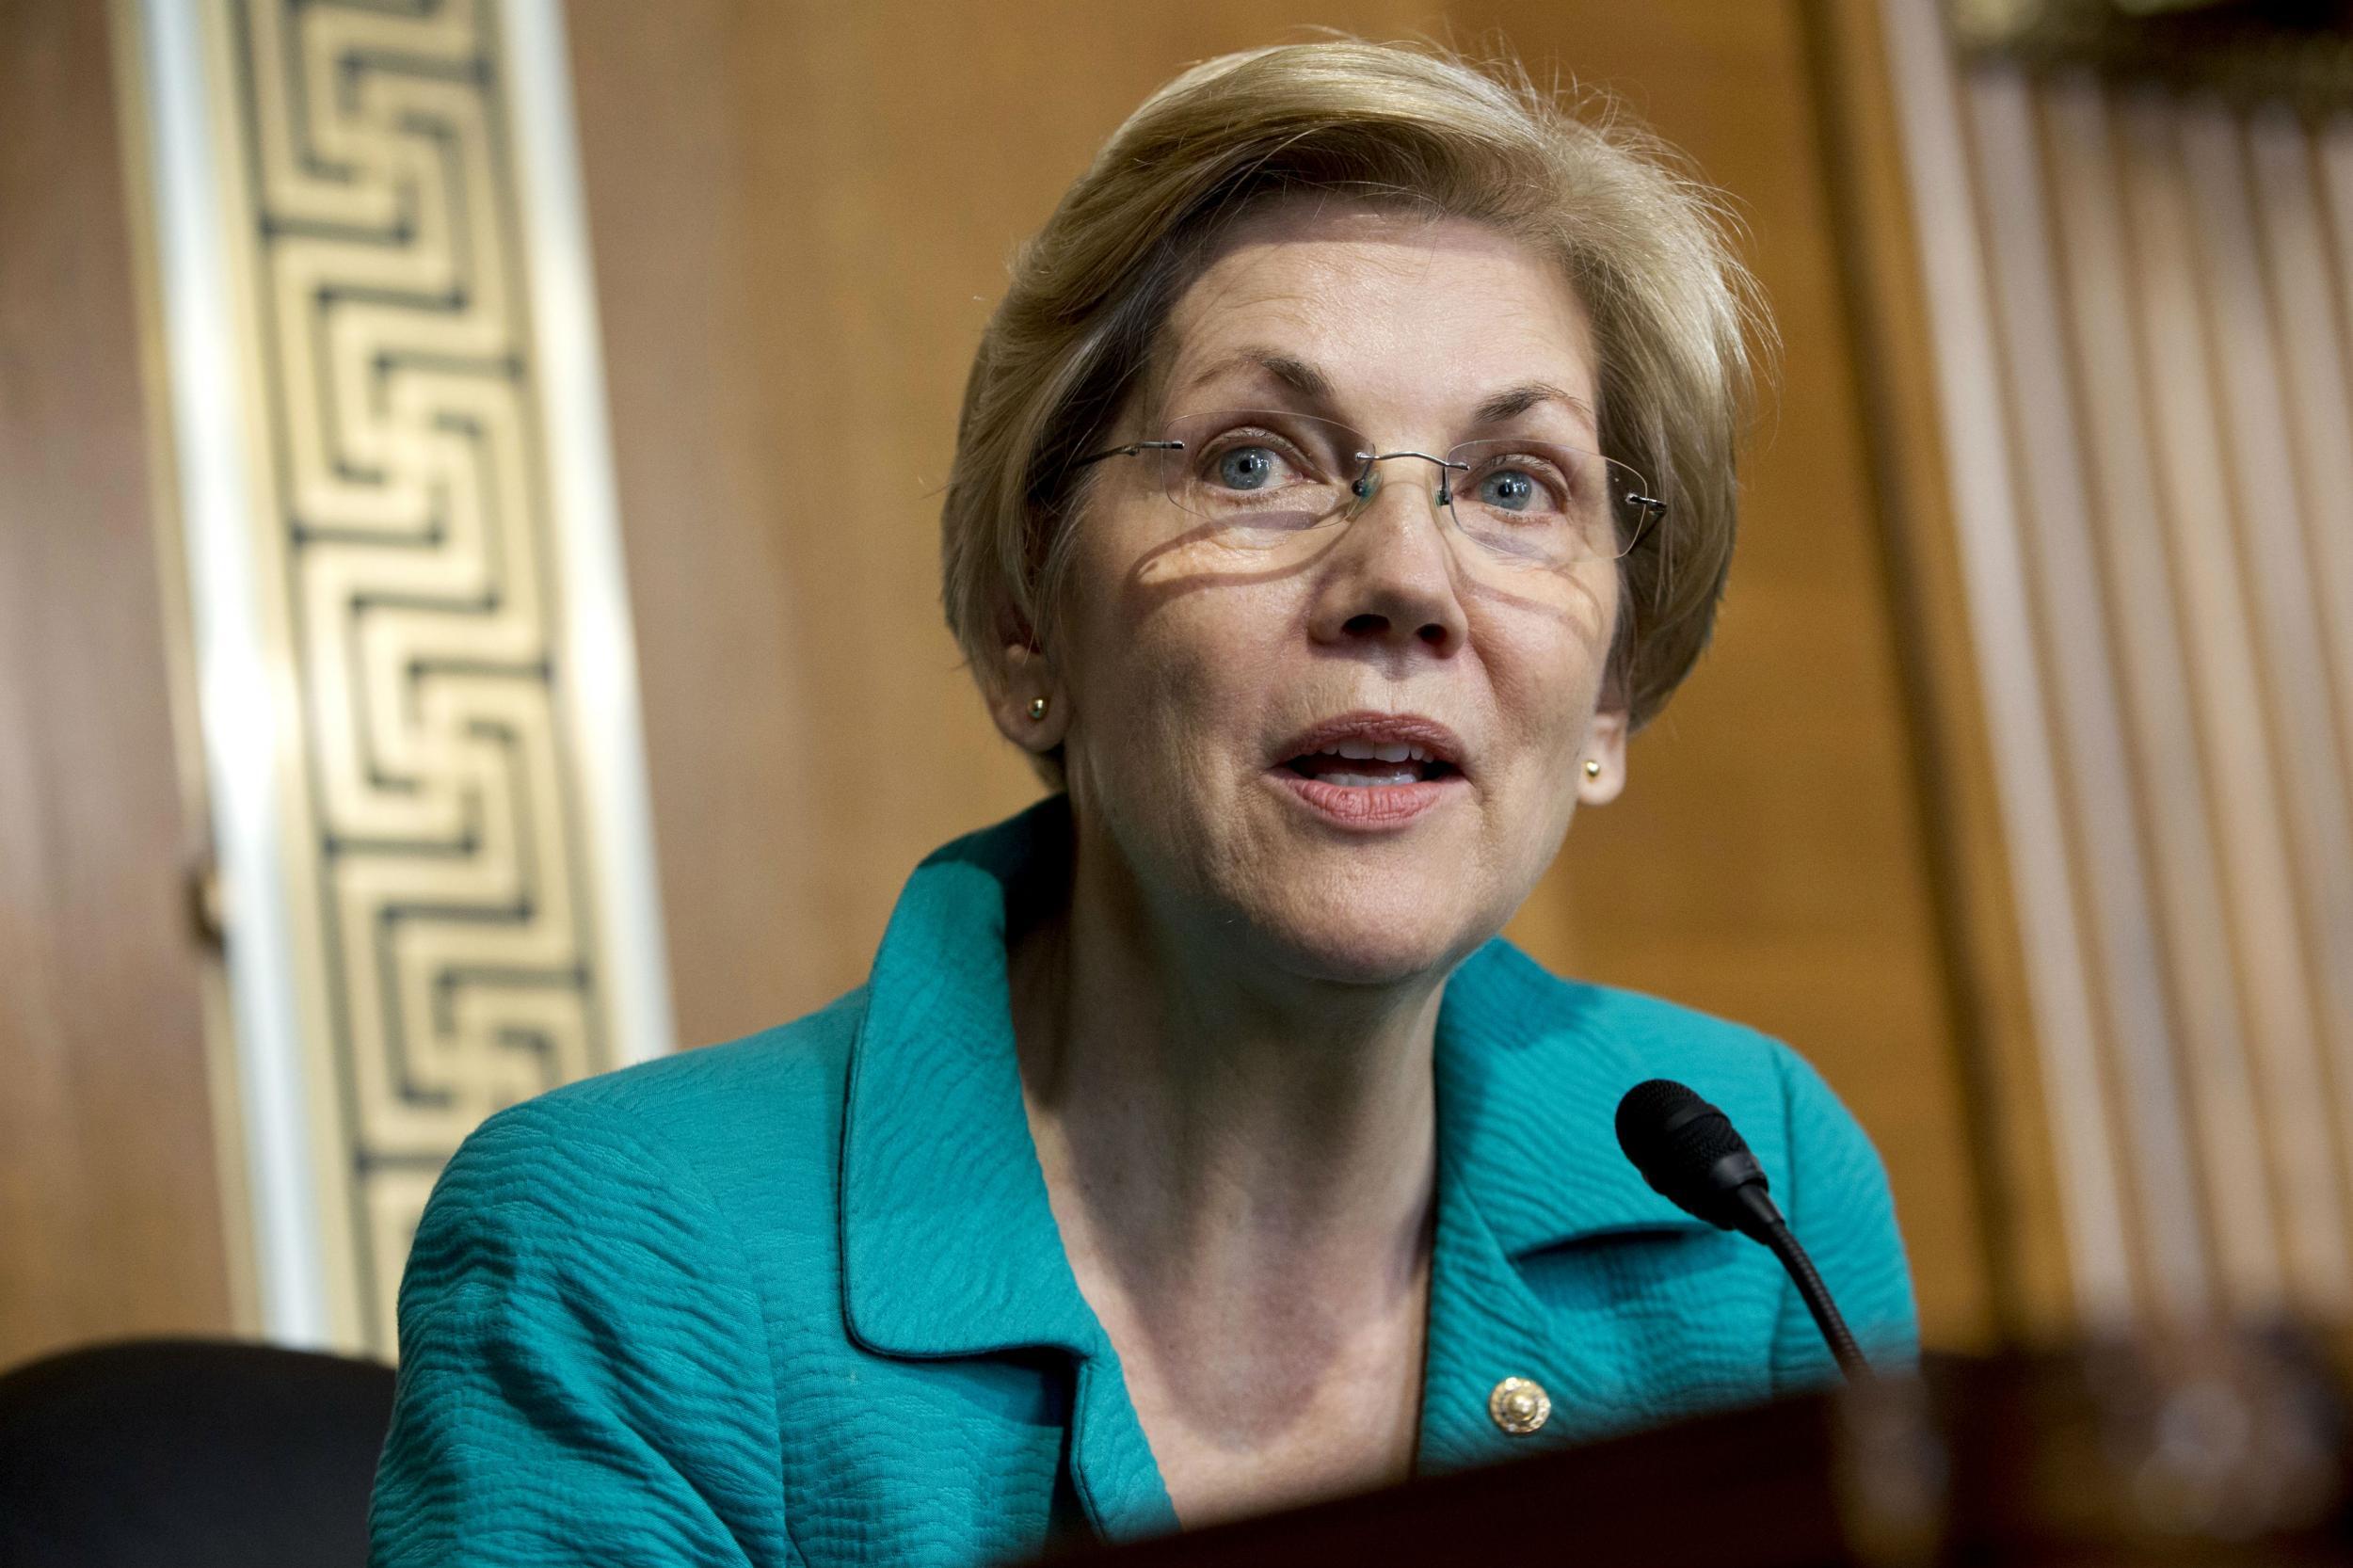 Elizabeth Warren says Twitter ban on political ads could muzzle climate activists but give polluters a free ride